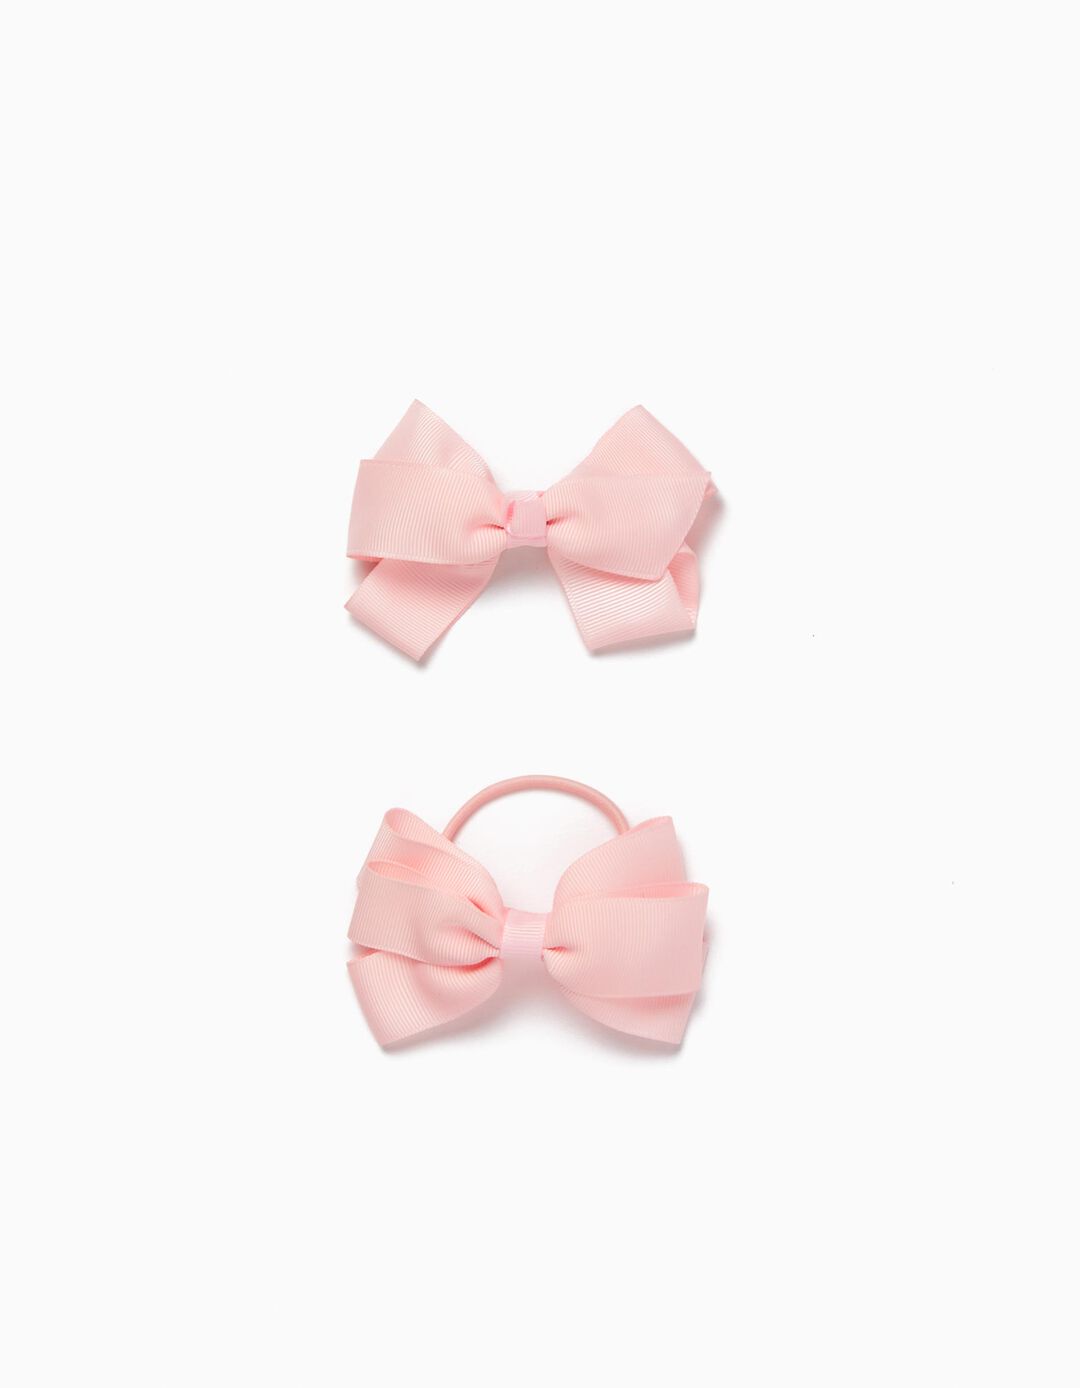 Hair slide + Bobble with Bow for Babies and Girls, Pink